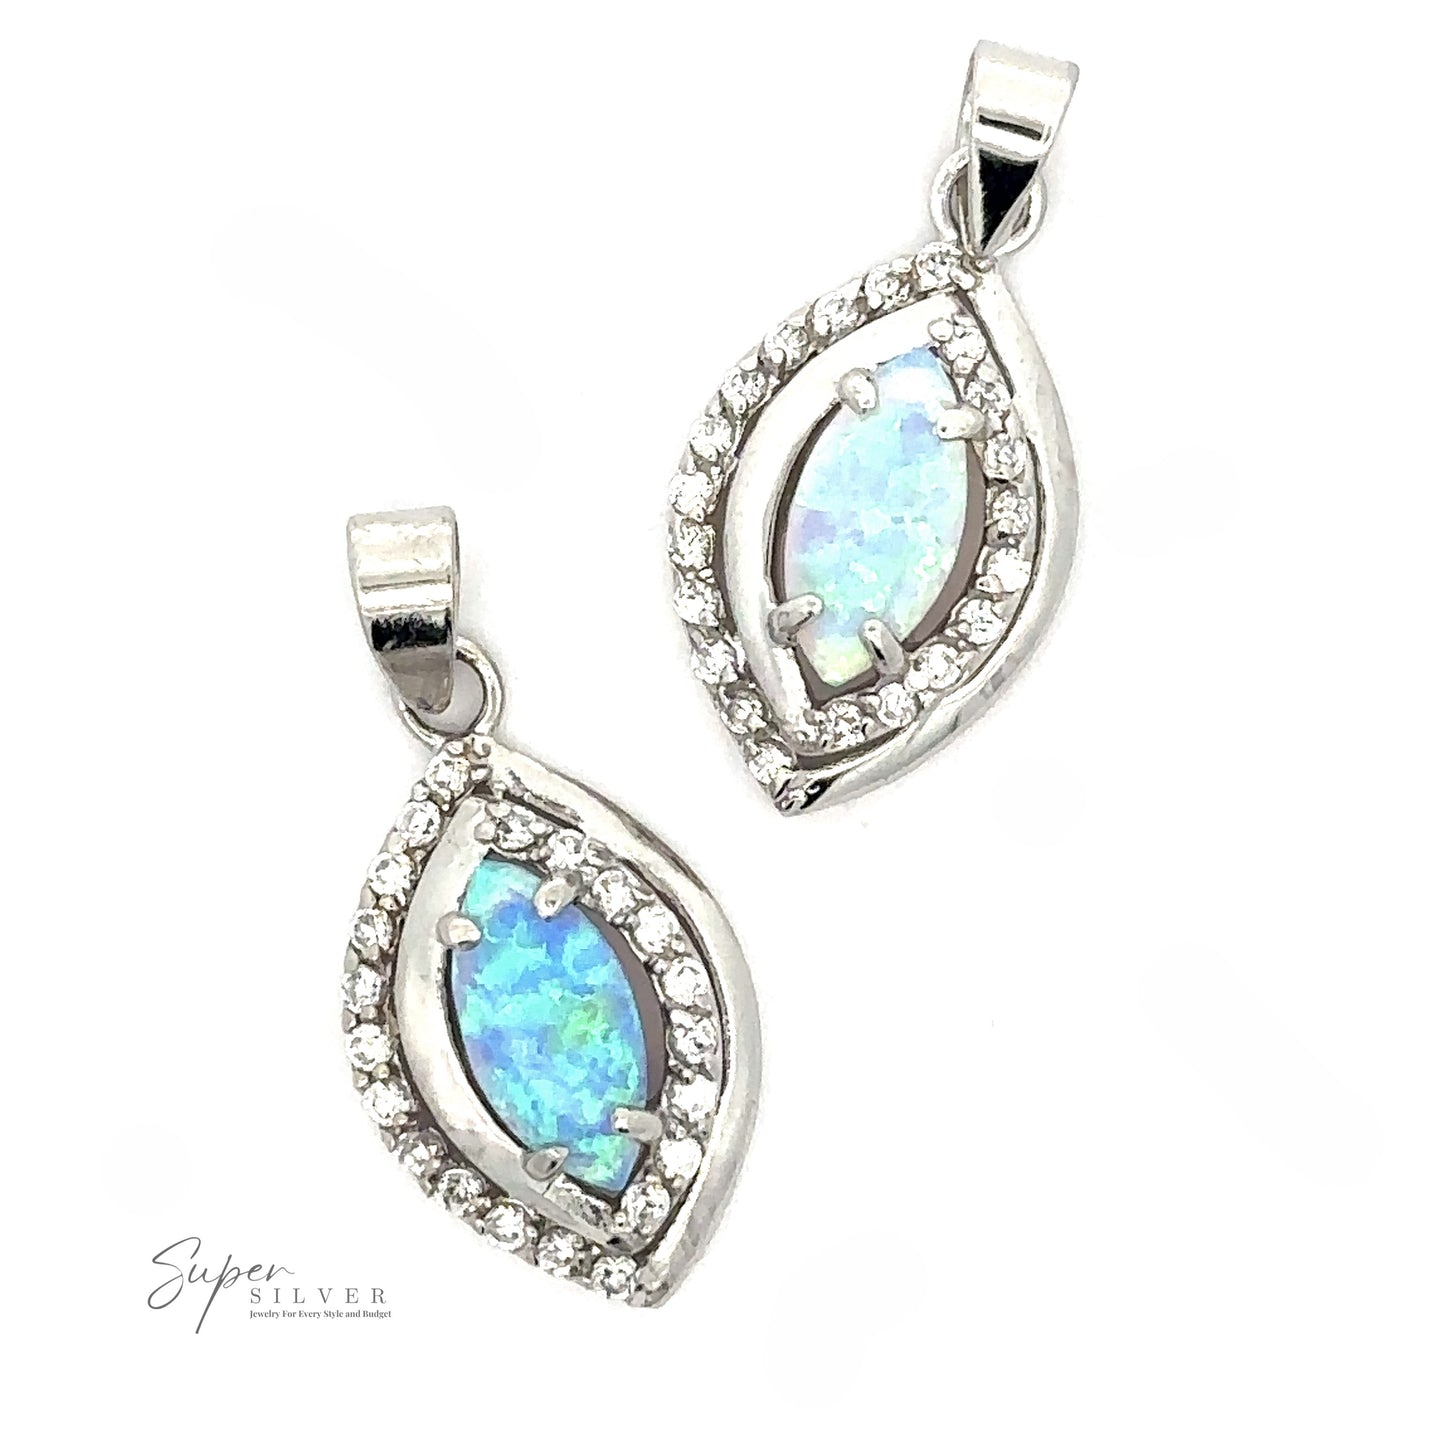 A pair of Opal Pendants with Cubic Zirconia. Decorative text reads "Super Silver.